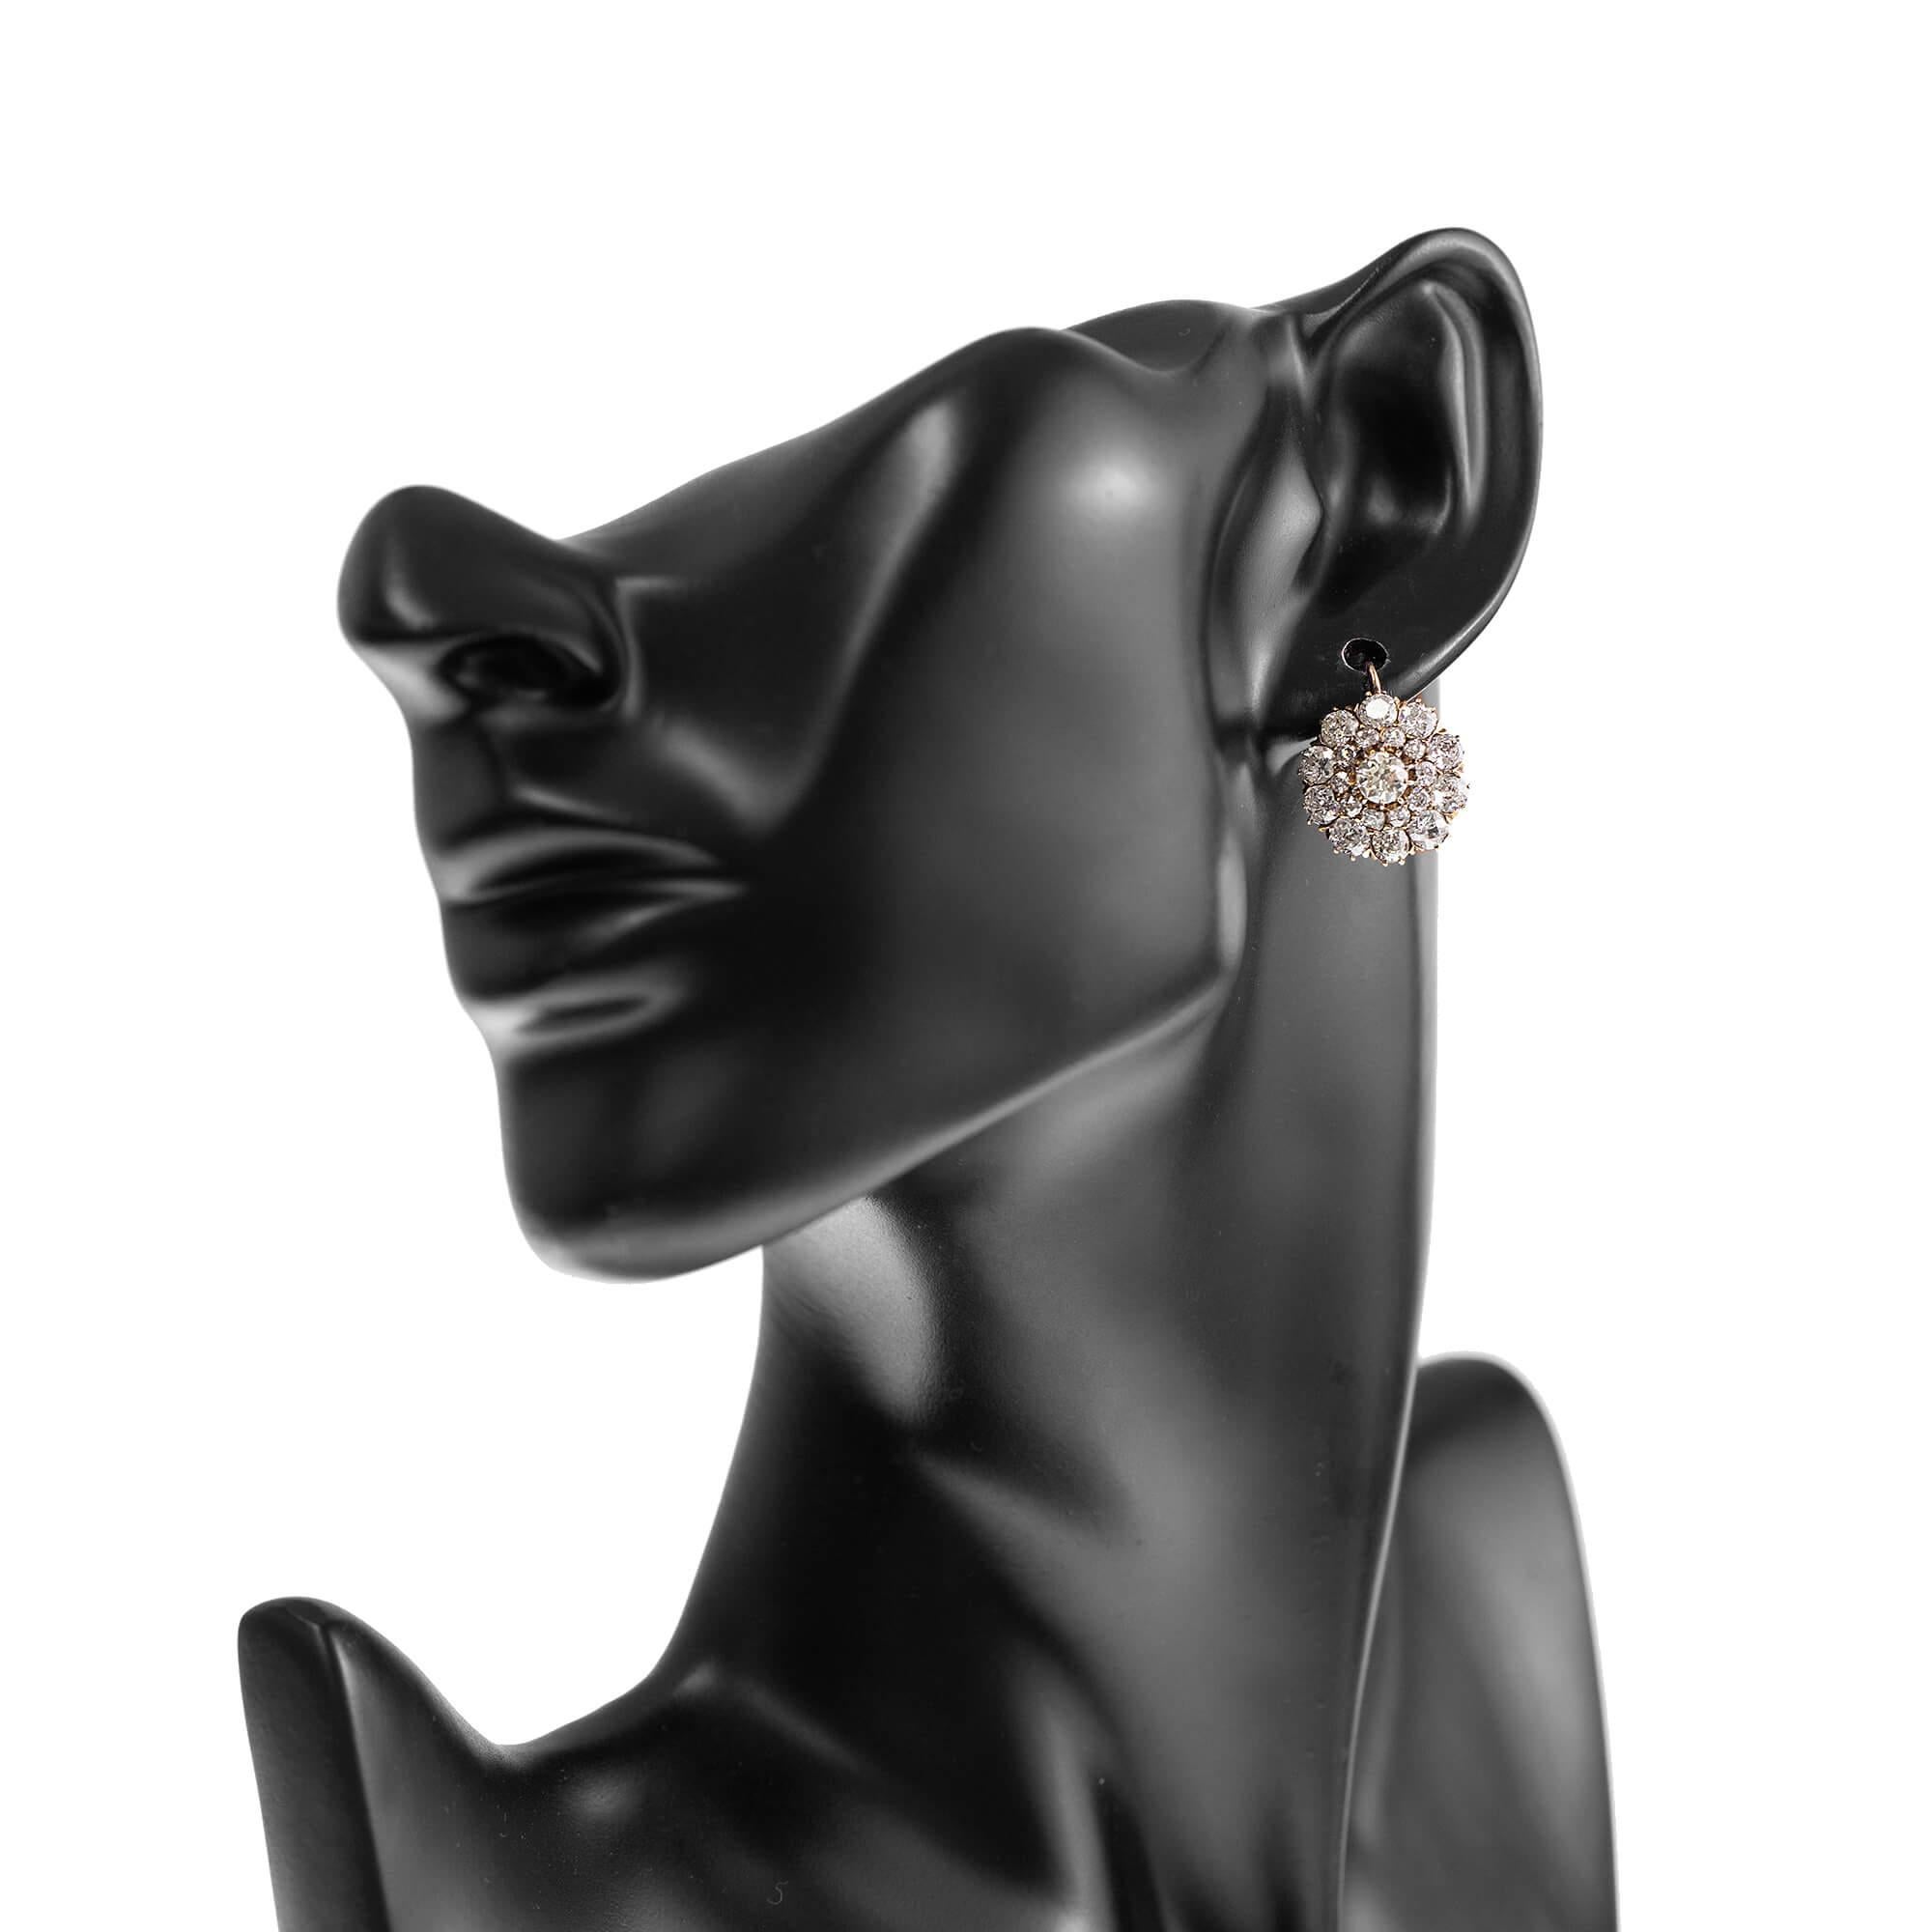 One pair of rose gold two-tiered diamond cluster earrings with continental clip fittings. Gallery claw set the diamonds have a spectacular sparkle. This pair of earring are showcased in their original box.

Diamonds: Centre set, one 5.0mm and one